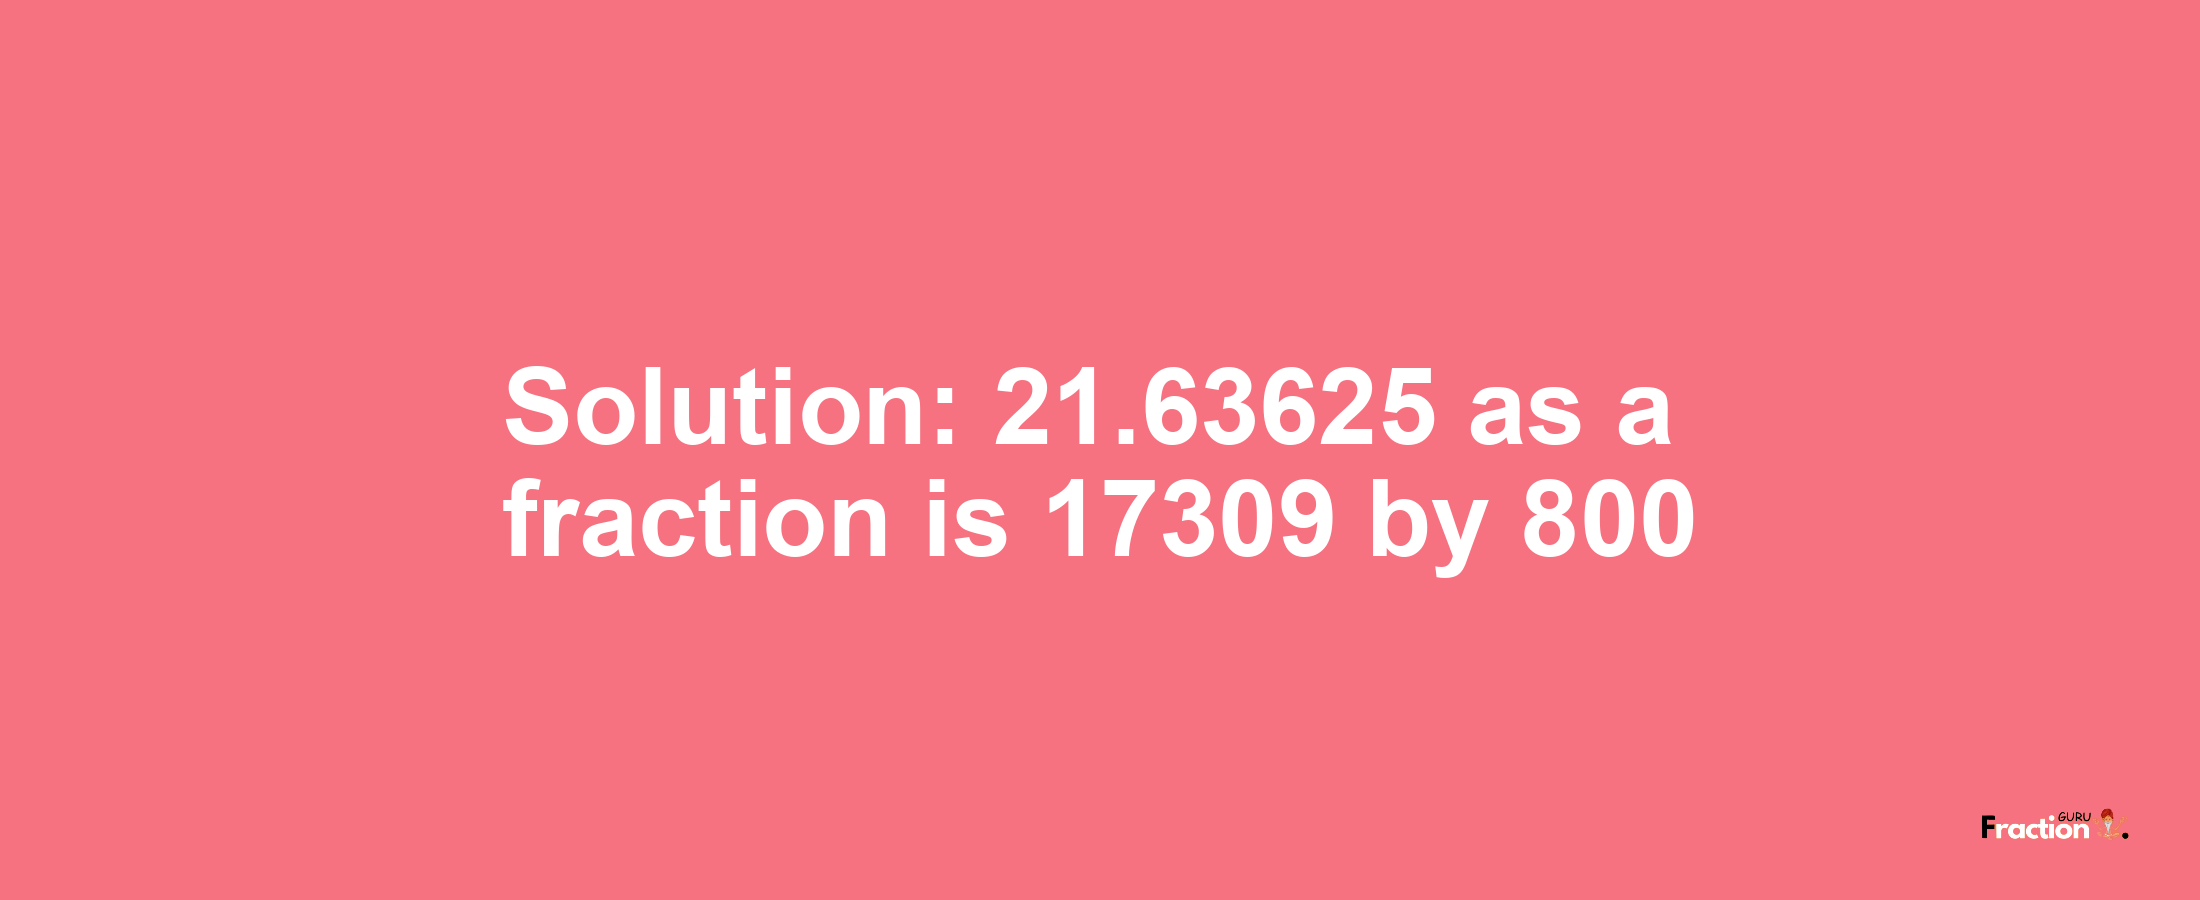 Solution:21.63625 as a fraction is 17309/800